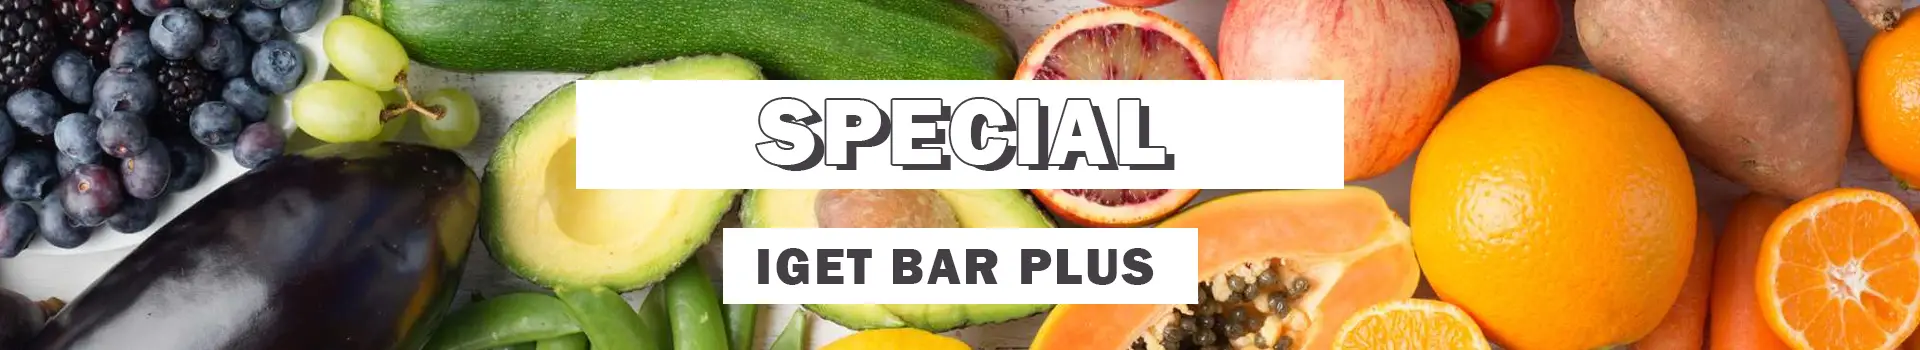 special iget bar plus flavours